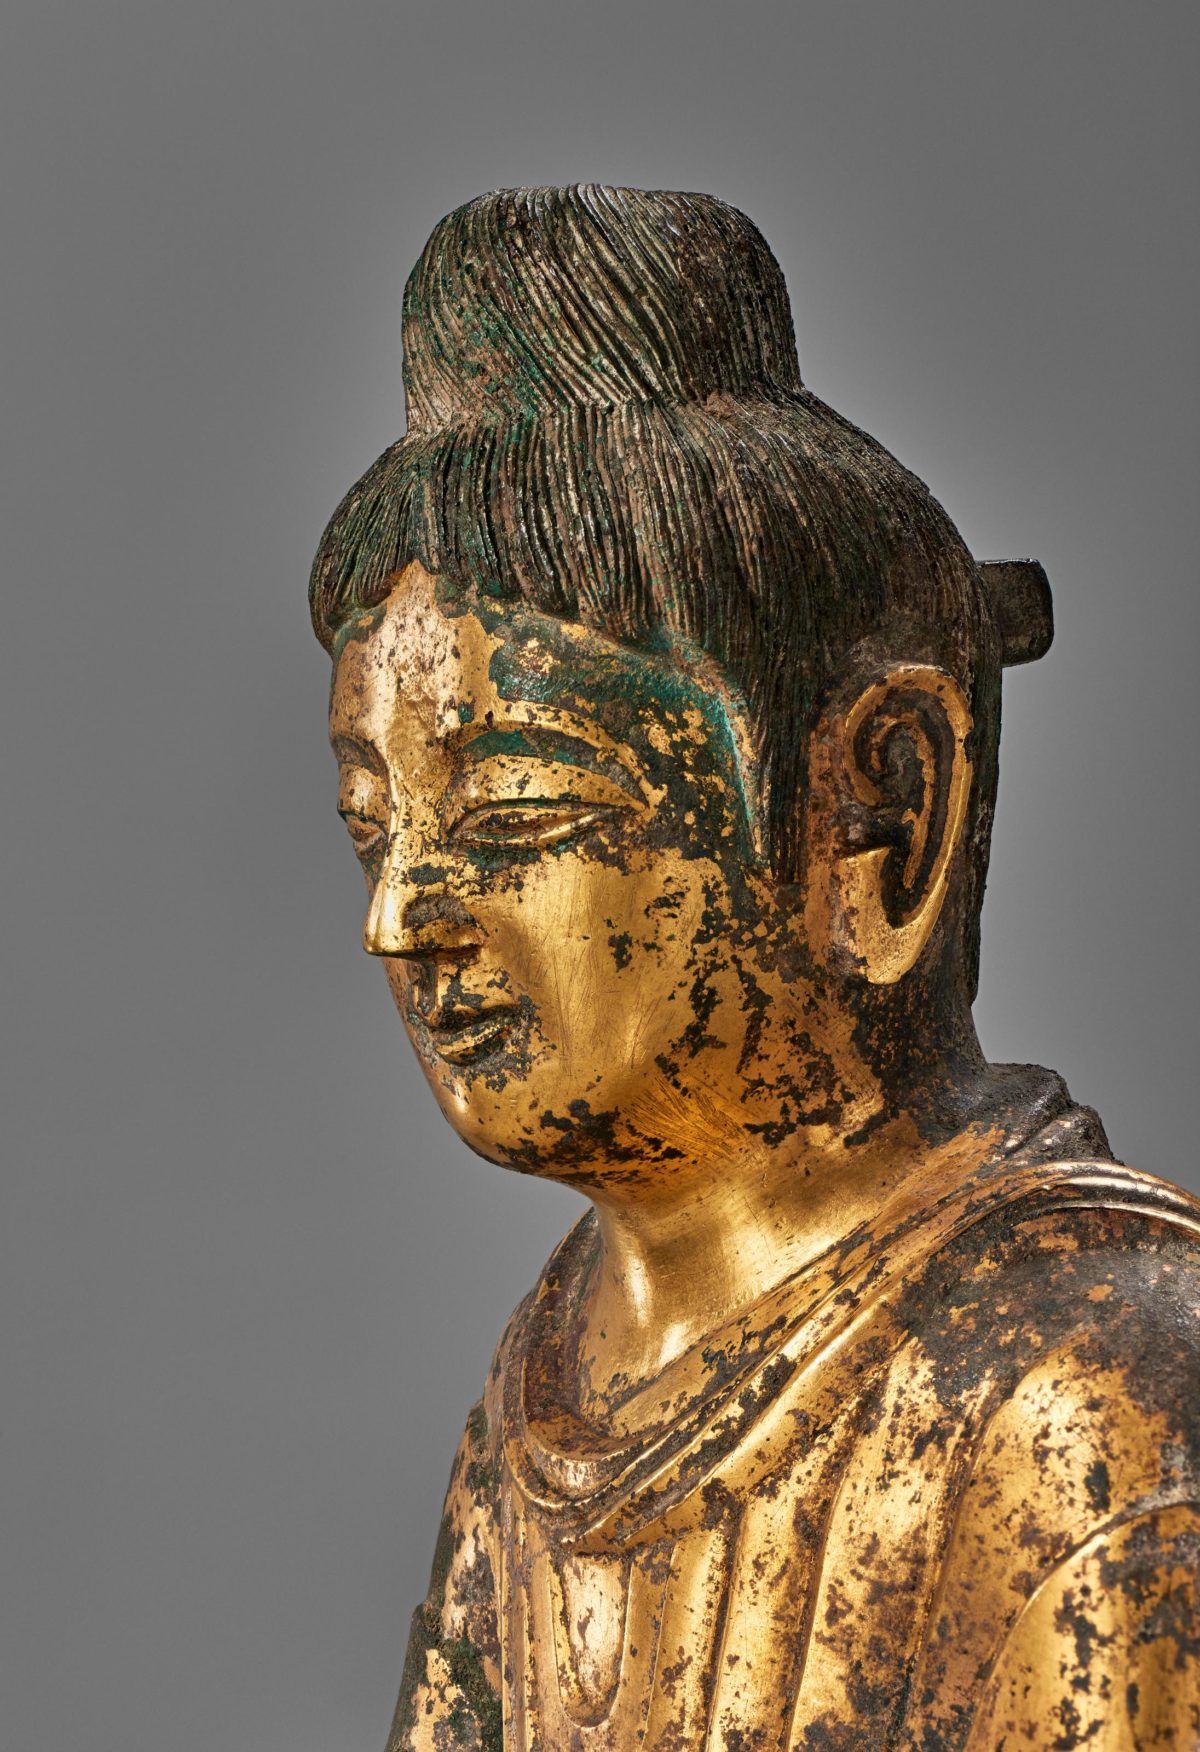 Closeup view of the head of a golden Buddha statue.